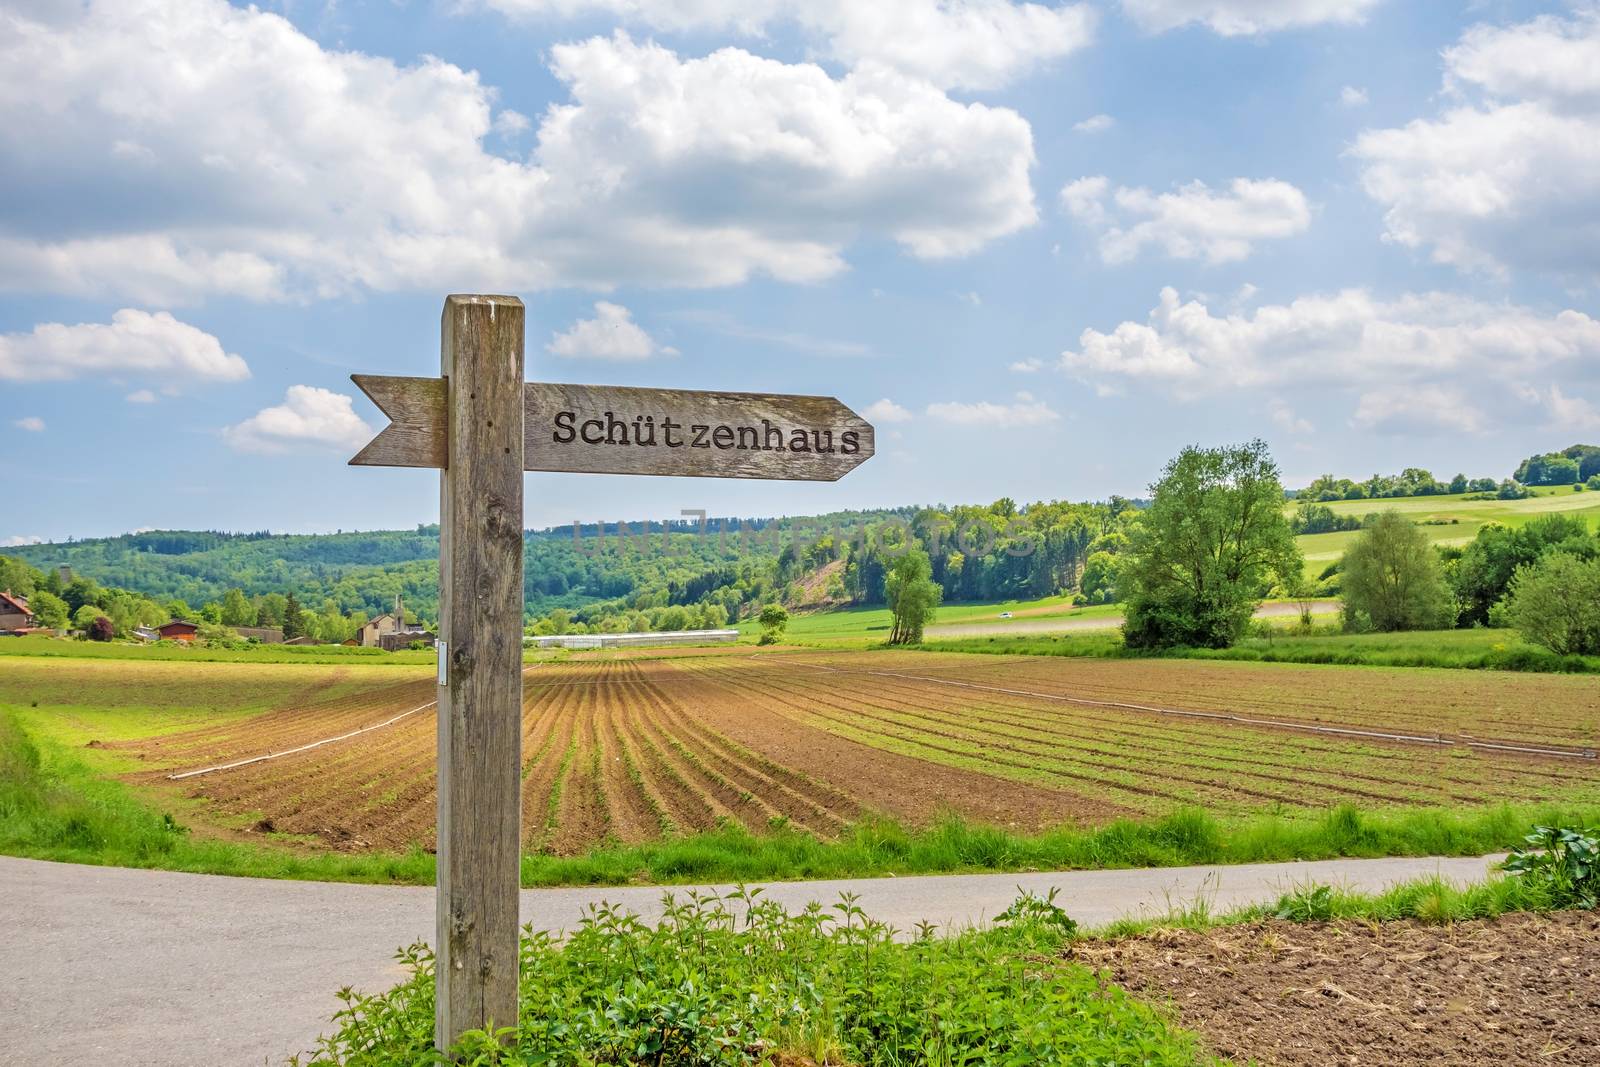 Signpost labeled with rifle associations clubhouse - in german language (Schuetzenhaus) - rural landscape in the background